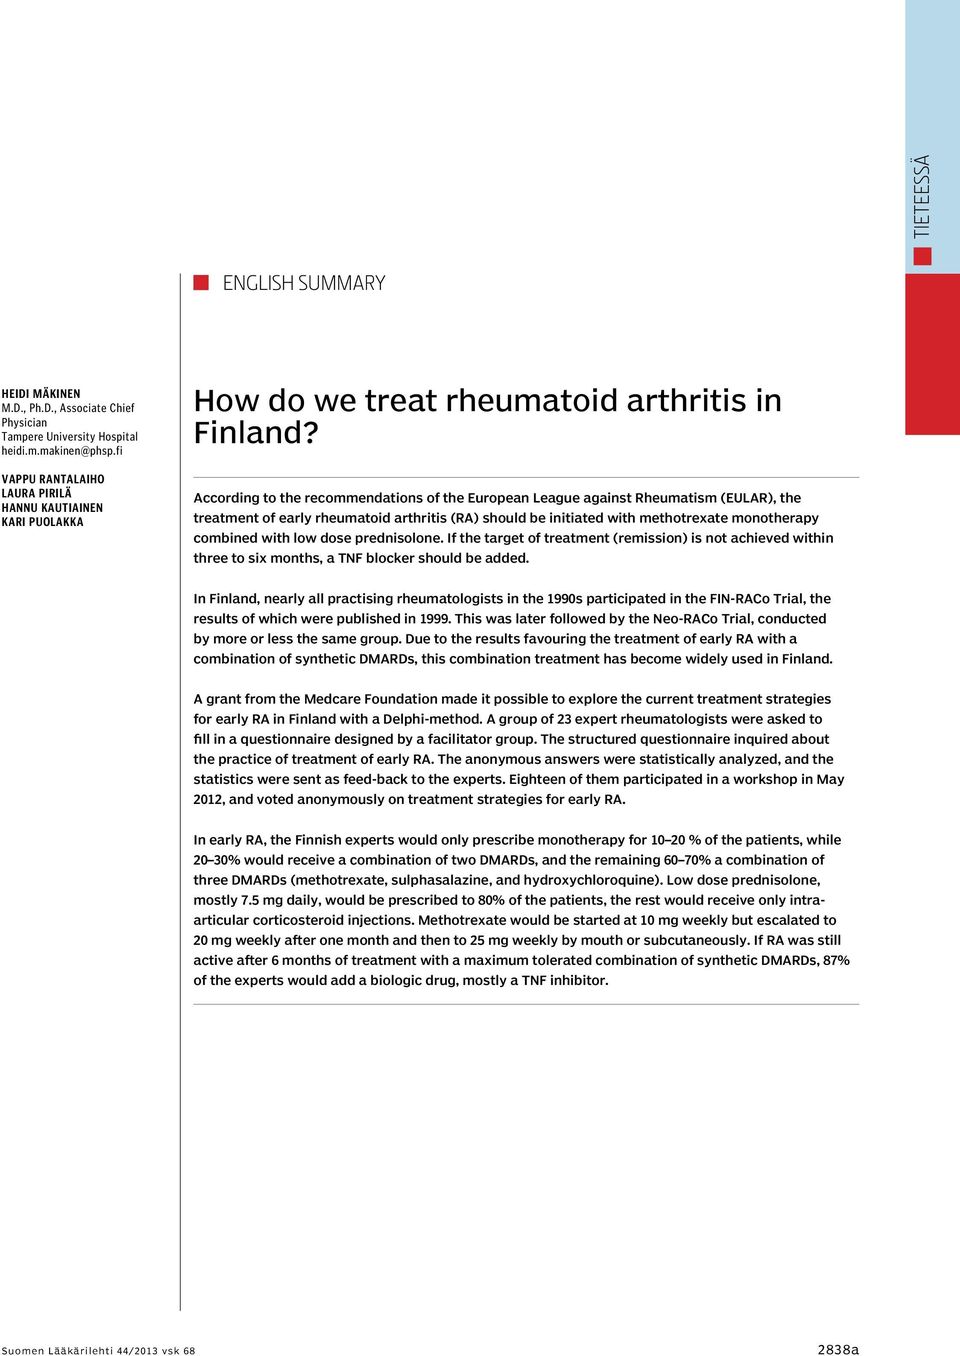 According to the recommendations of the European League against Rheumatism (EULAR), the treatment of early rheumatoid arthritis (RA) should be initiated with methotrexate monotherapy combined with